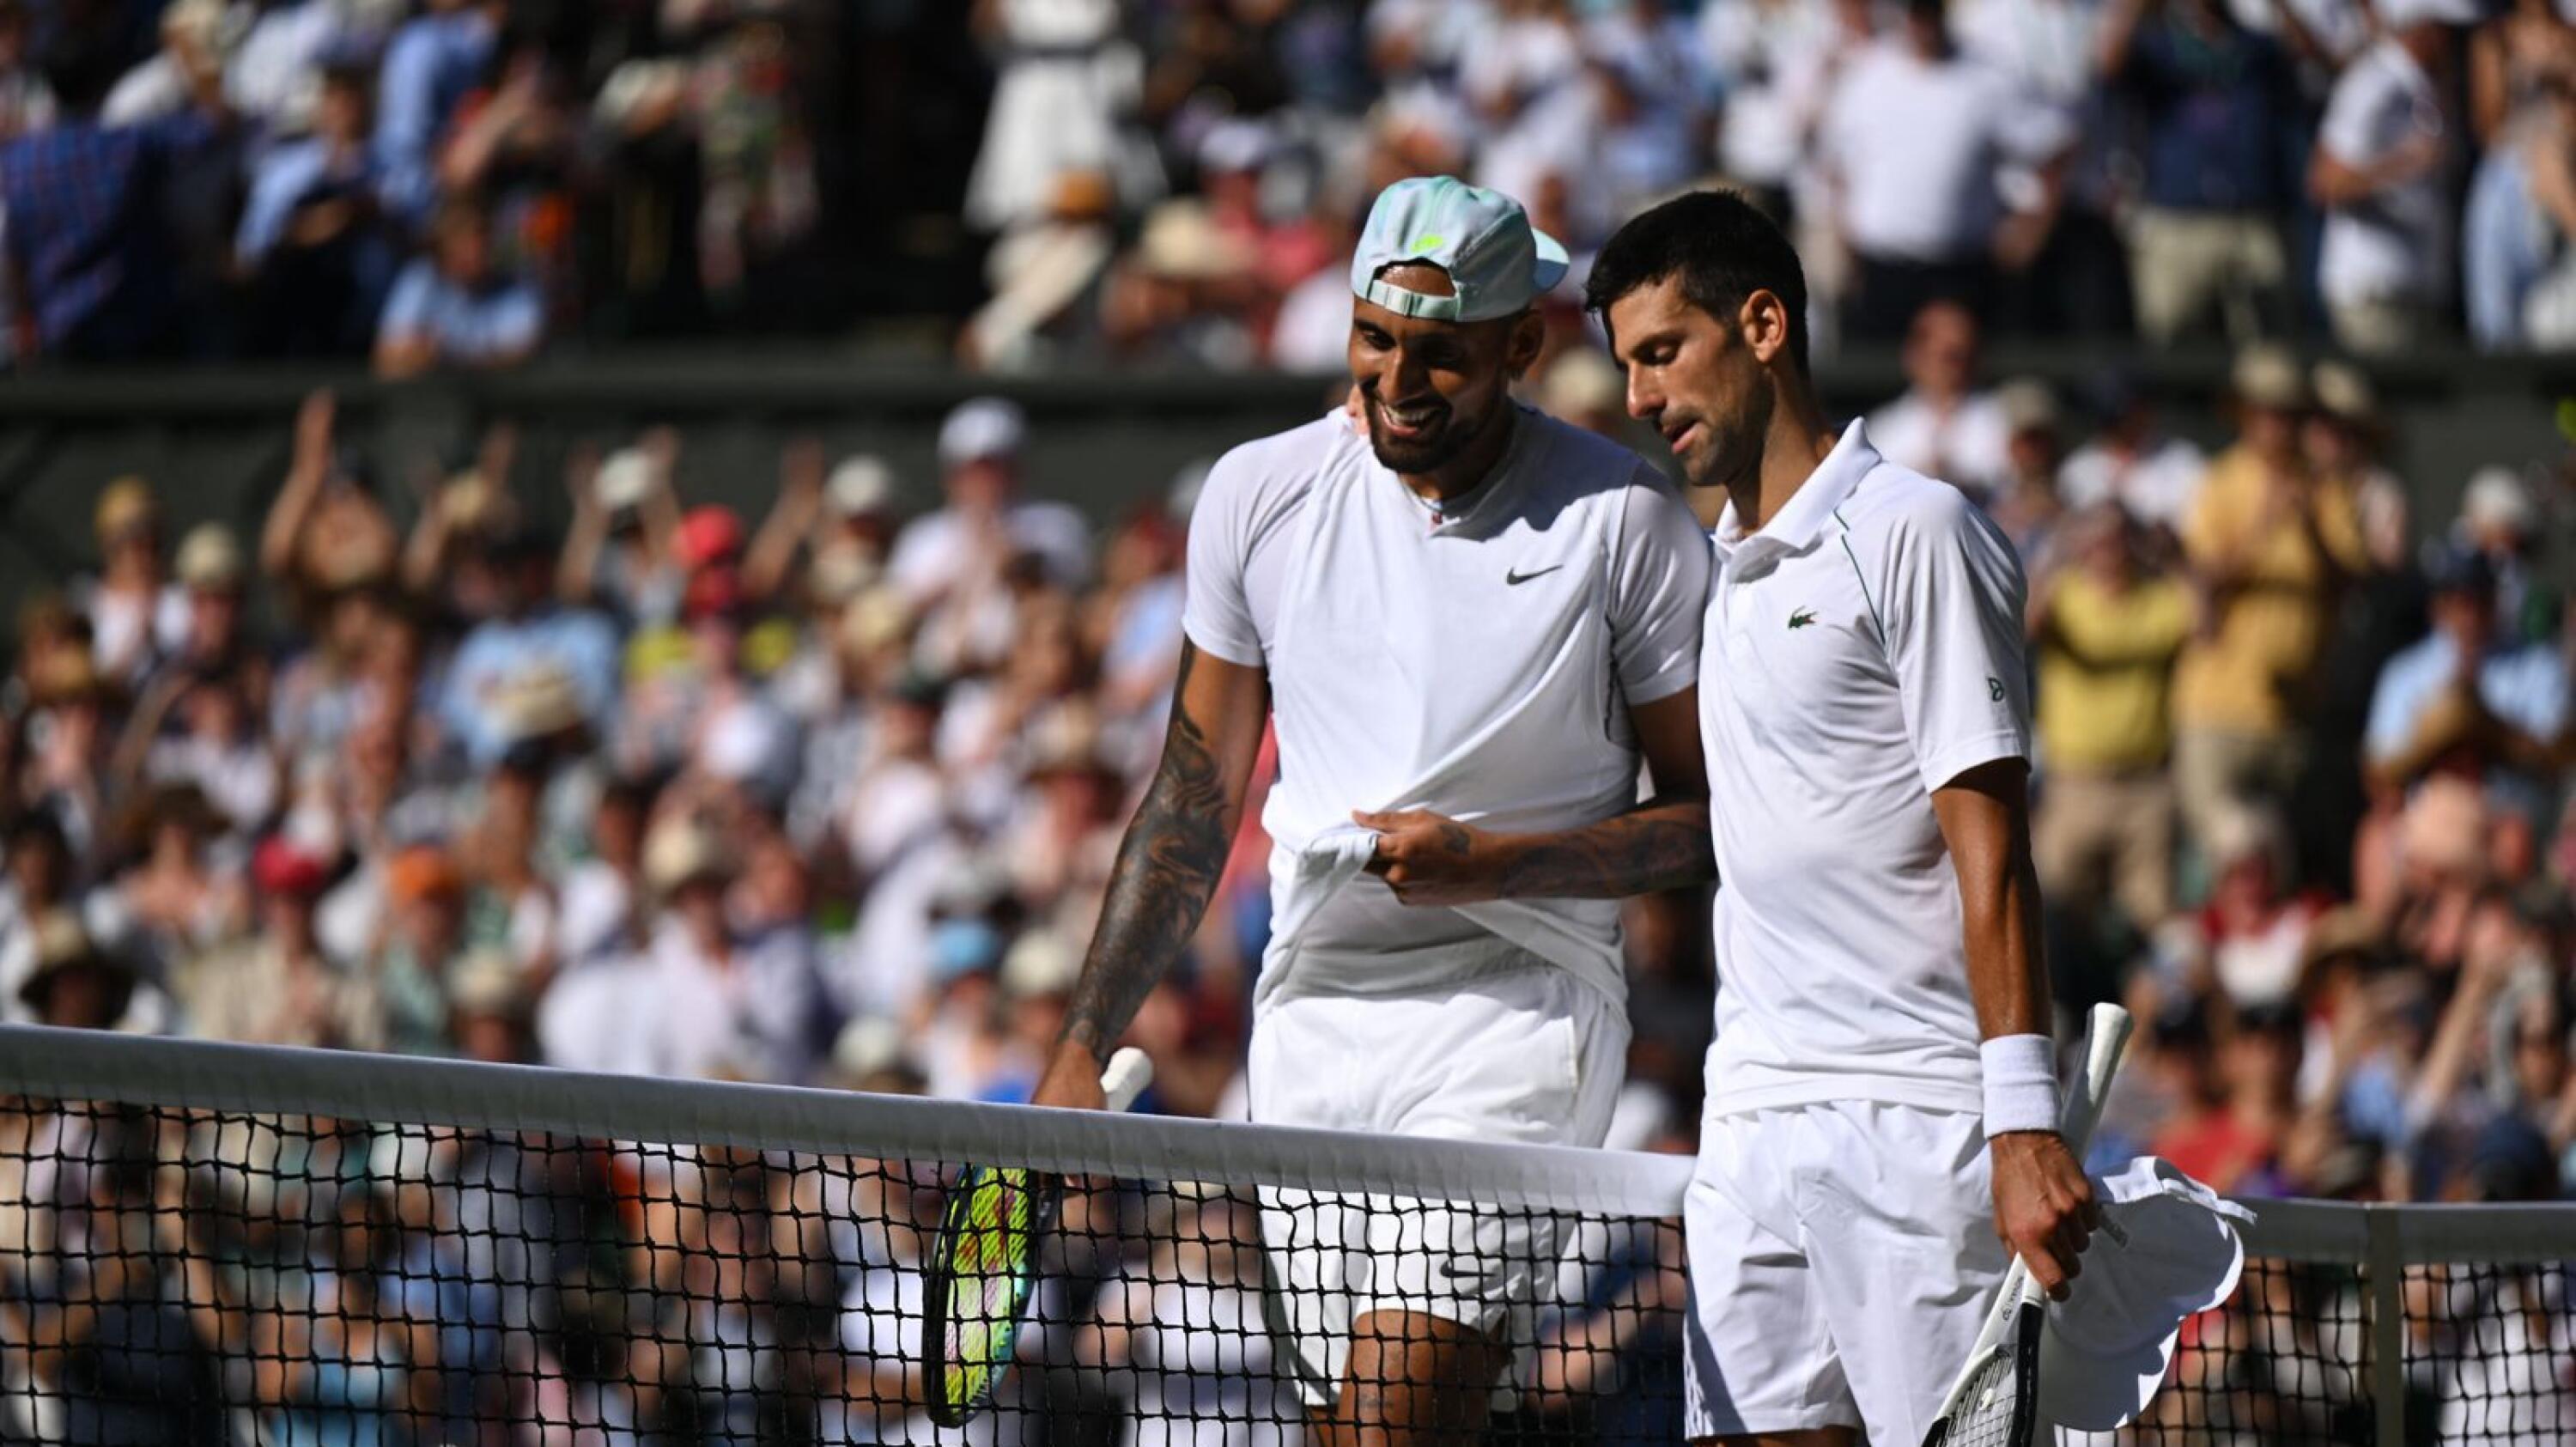 Australia's Nick Kyrgios congratulates Serbia's Novak Djokovic for his victory after their men's singles final tennis match on the fourteenth day of the 2022 Wimbledon Championships at The All England Tennis Club in Wimbledon, southwest London, on Sunday